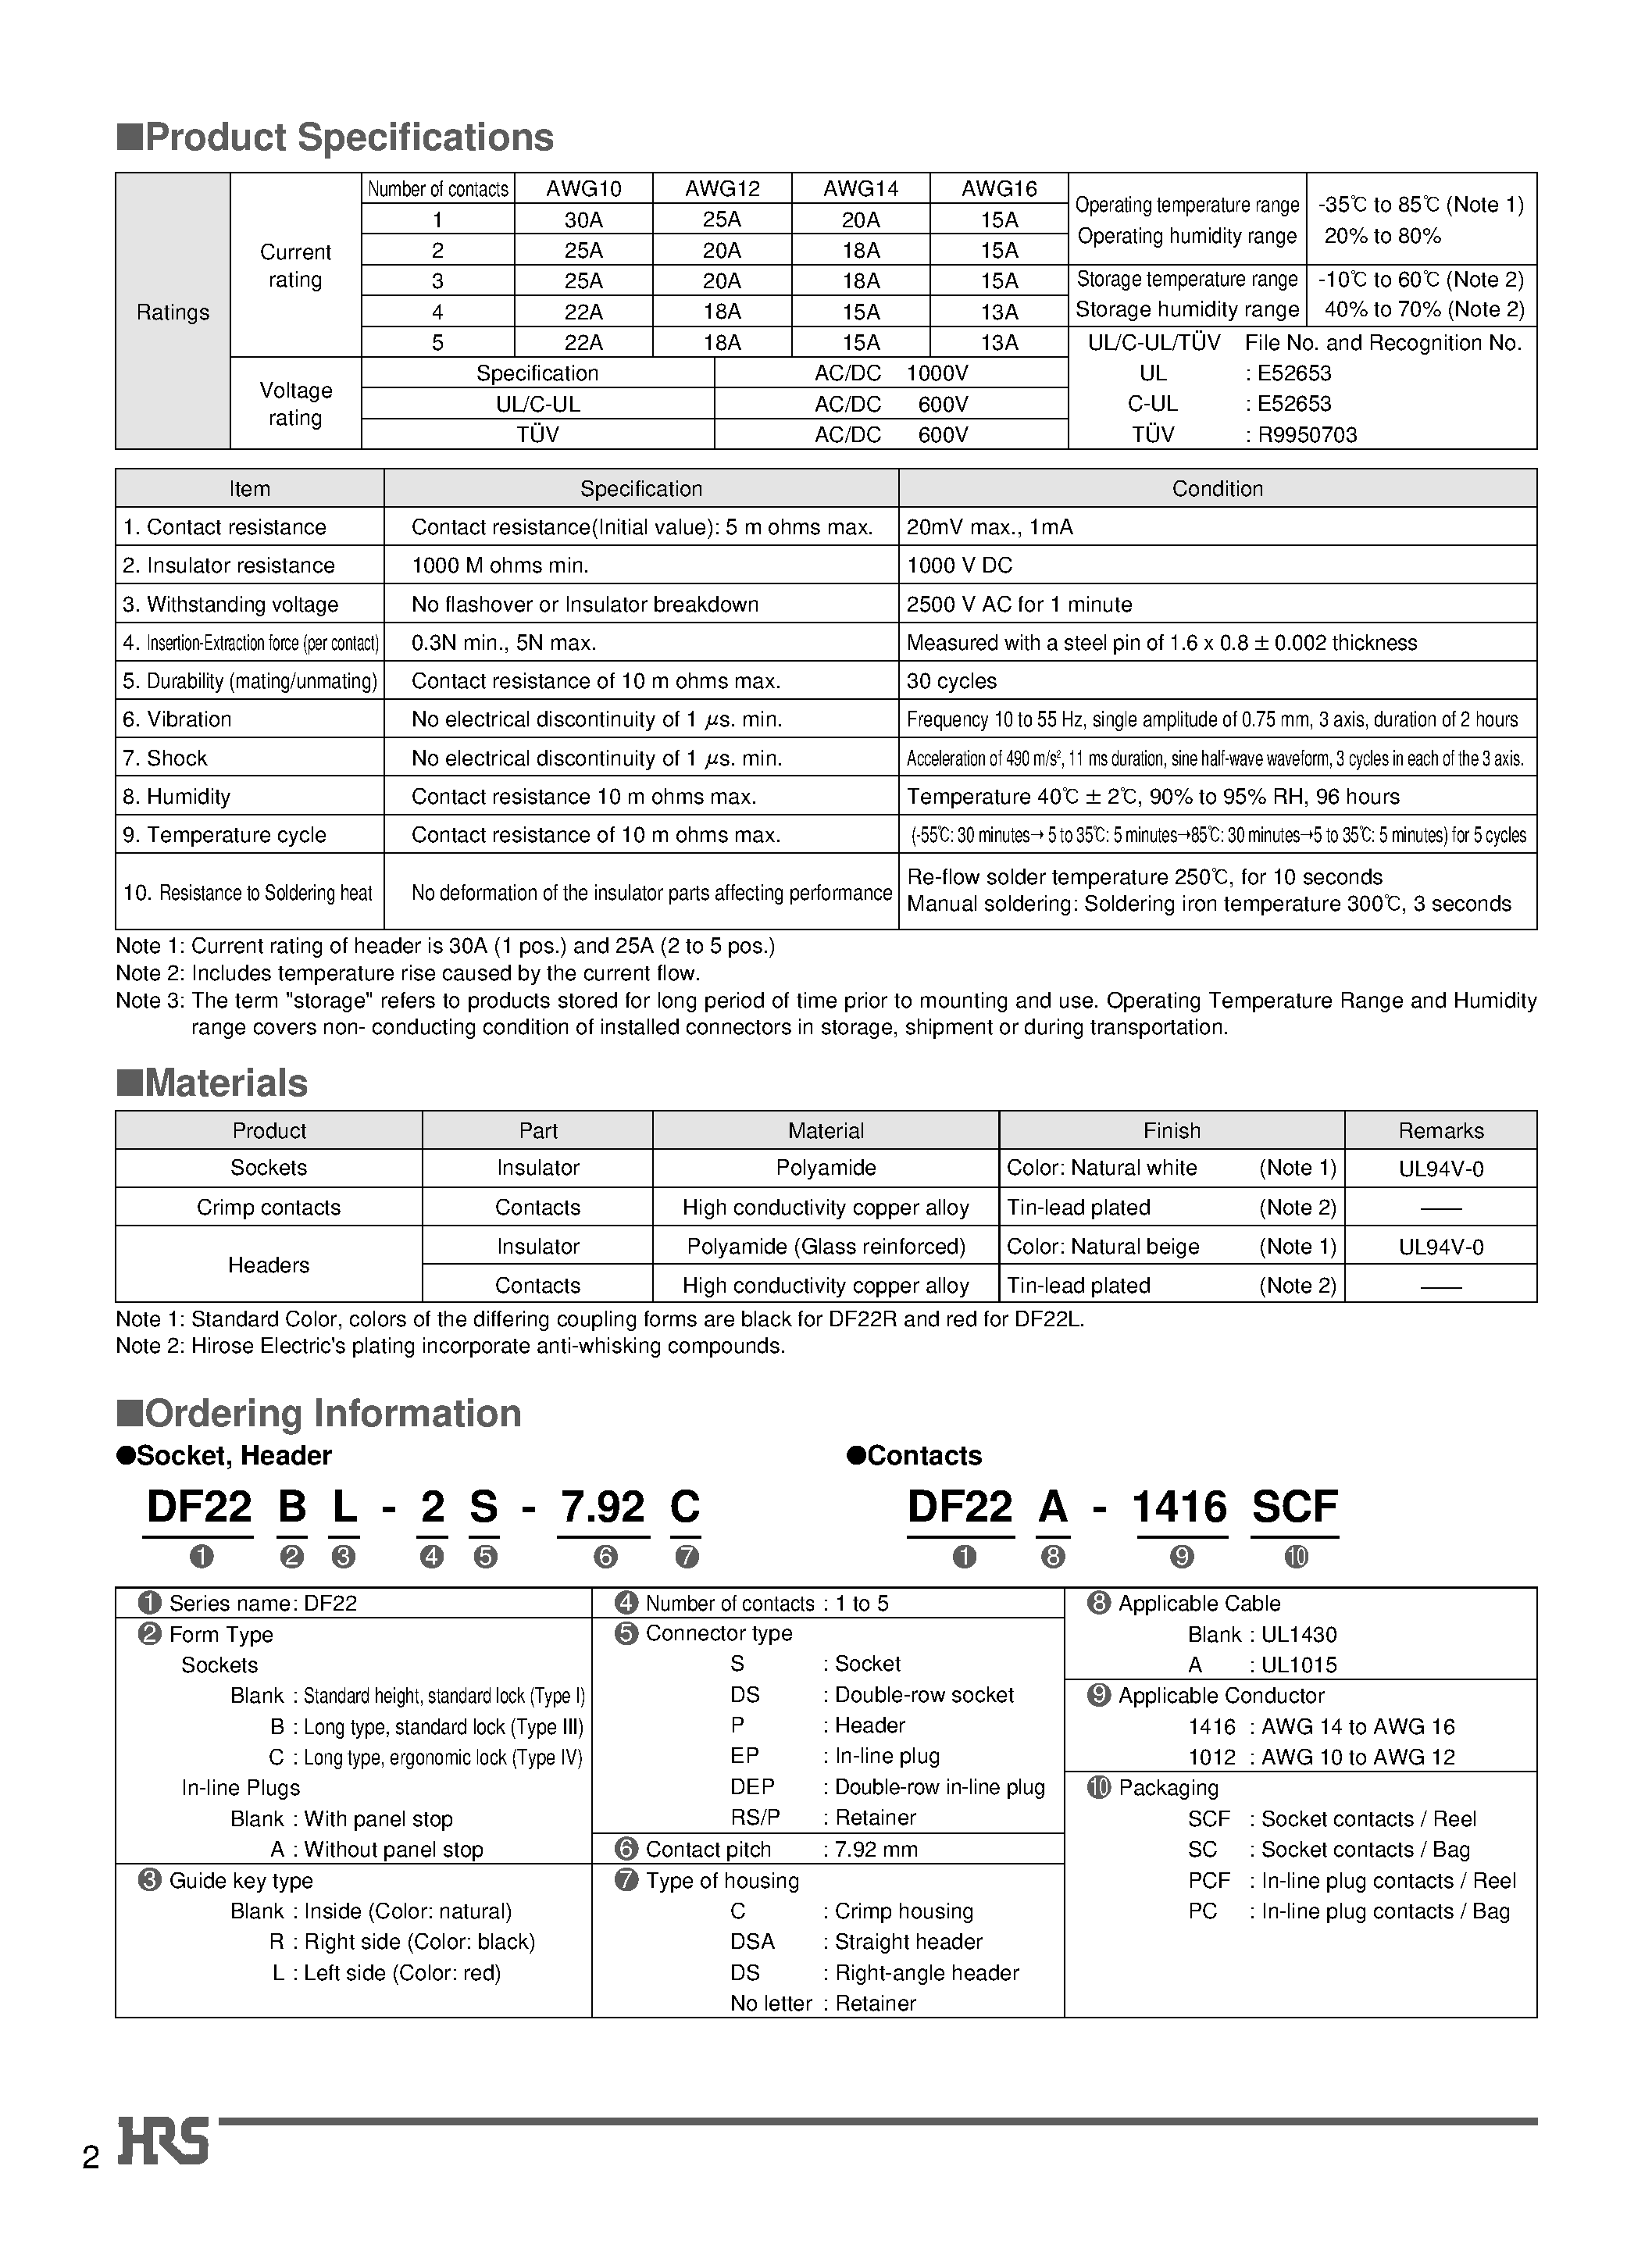 Datasheet DF22-1DEP-7.92C - 7.92 mm Contact Pitch/ High-Current Connectors for Internal Power Supplies (UL/ C-UL and TUV Listed) page 2